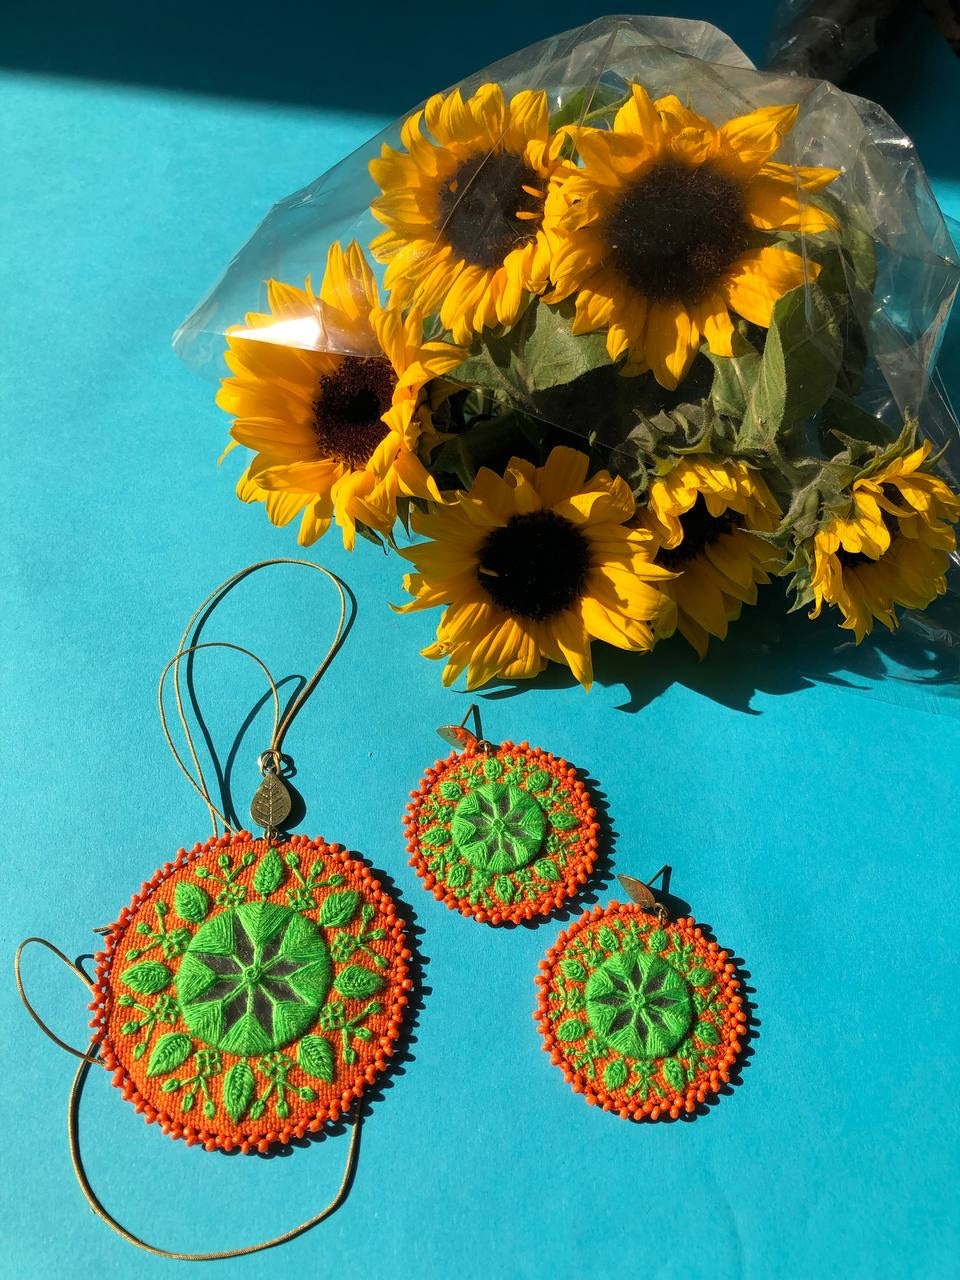 Handmade Embroidered Circular Necklace With Green and Orange Thread